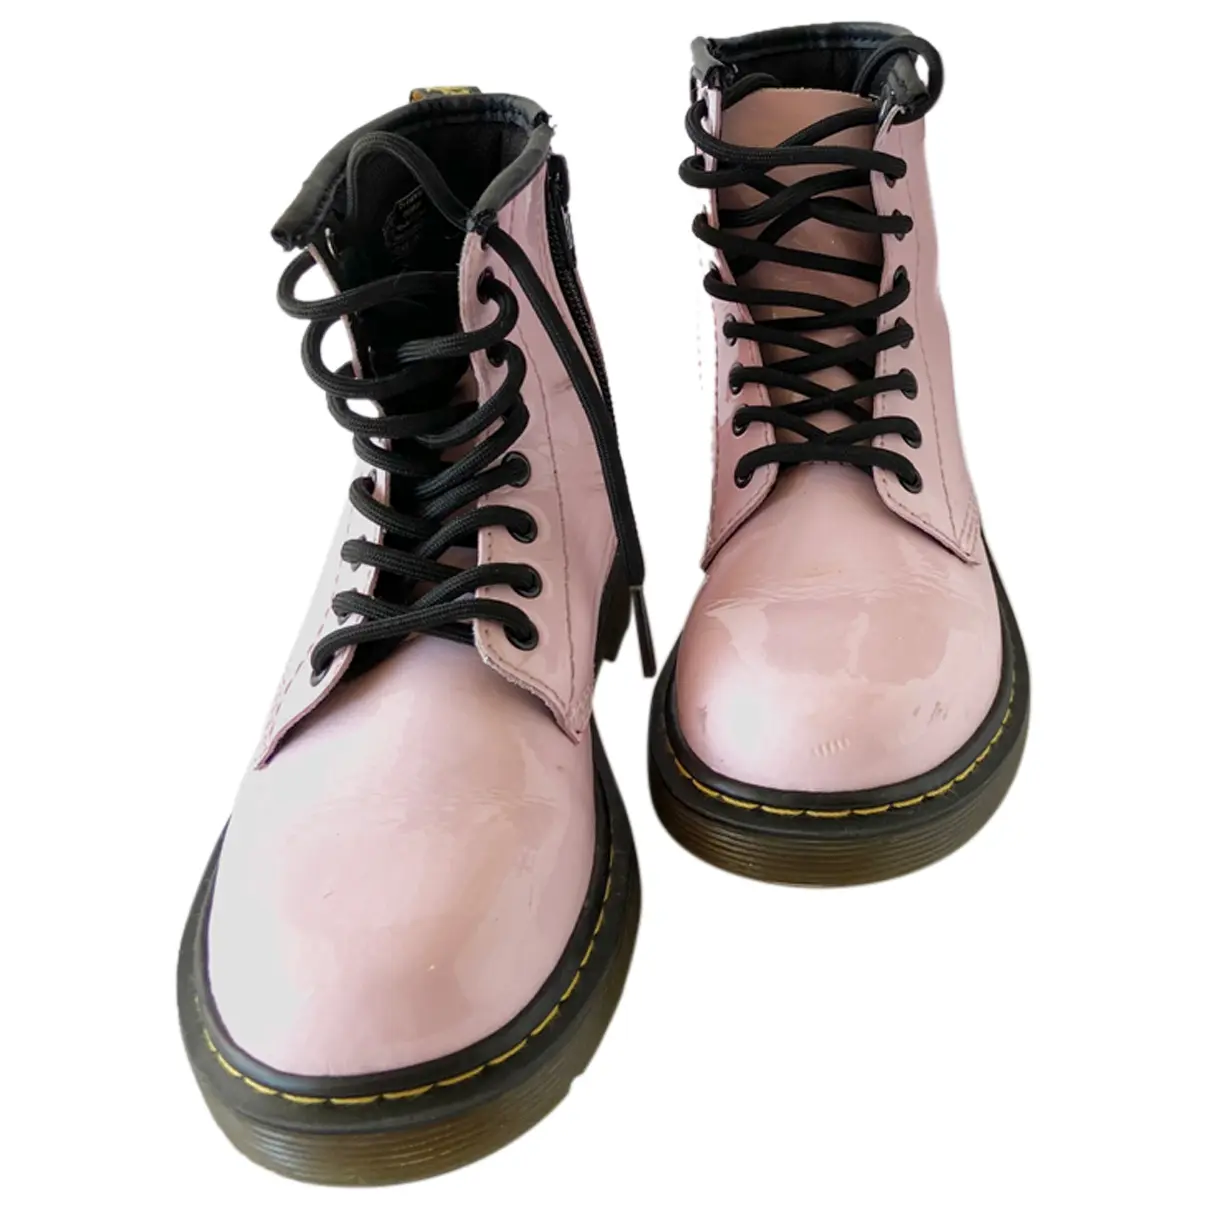 Patent leather boots Dr. Martens